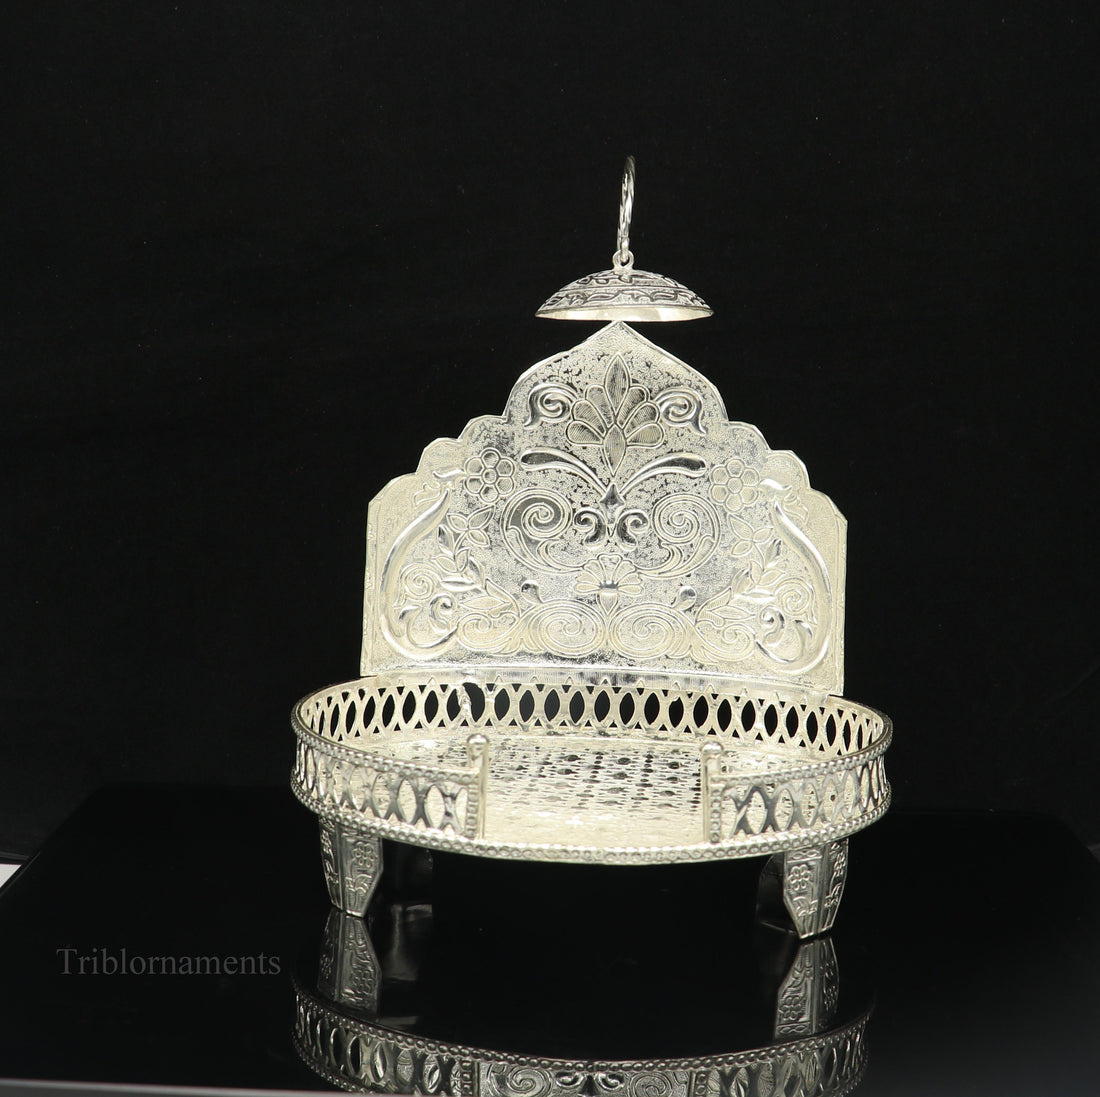 925 pure sterling silver vintage design Singhasan, idol Krishna, Ganesh throne, god statue's stand chair, temple puja article India su472 - TRIBAL ORNAMENTS